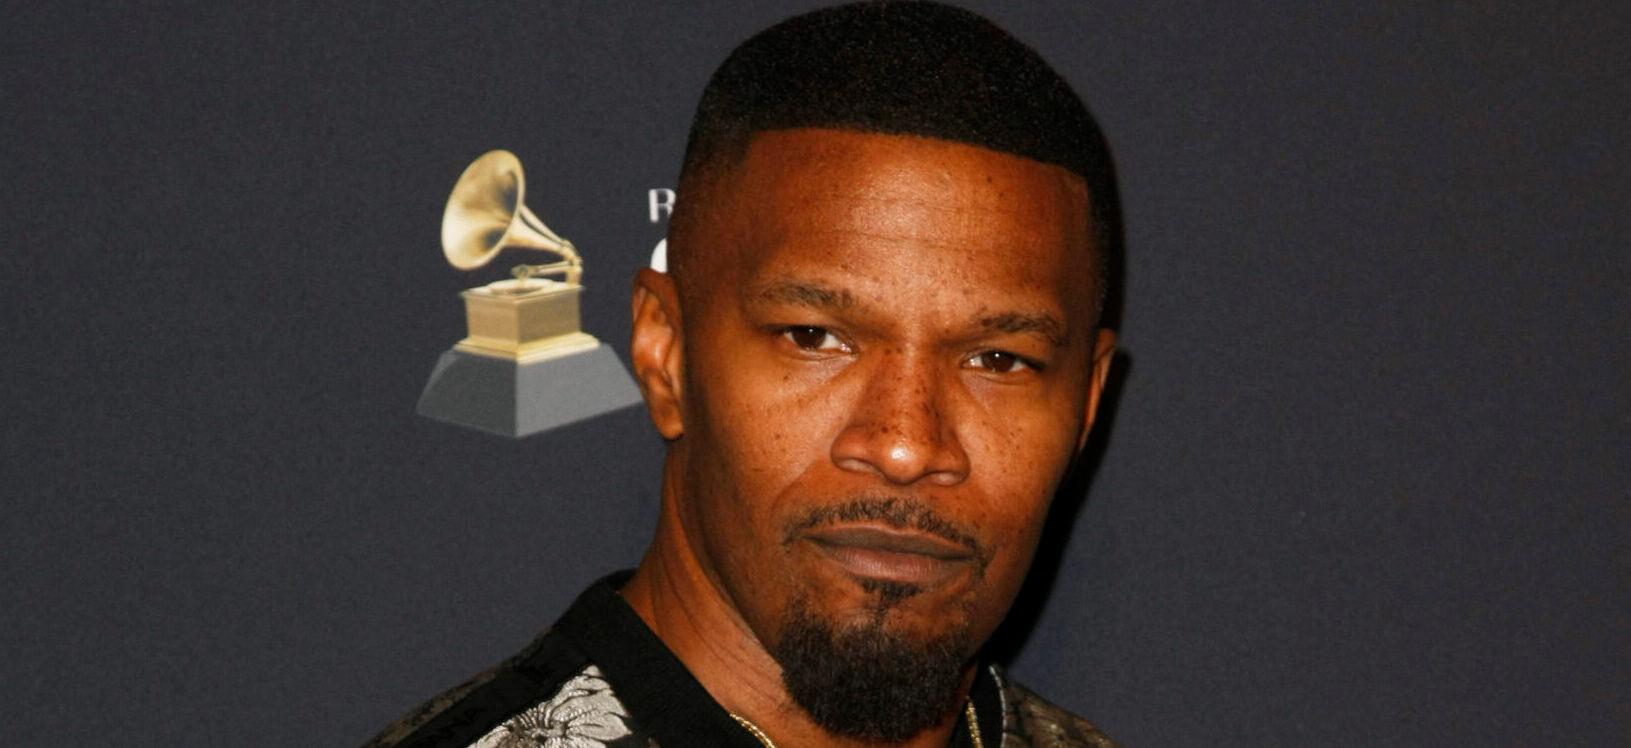 Jamie Foxx Says He’s ‘Thankful’ For ‘Second Chance To Enjoy’ Life After Mysterious Health Scare